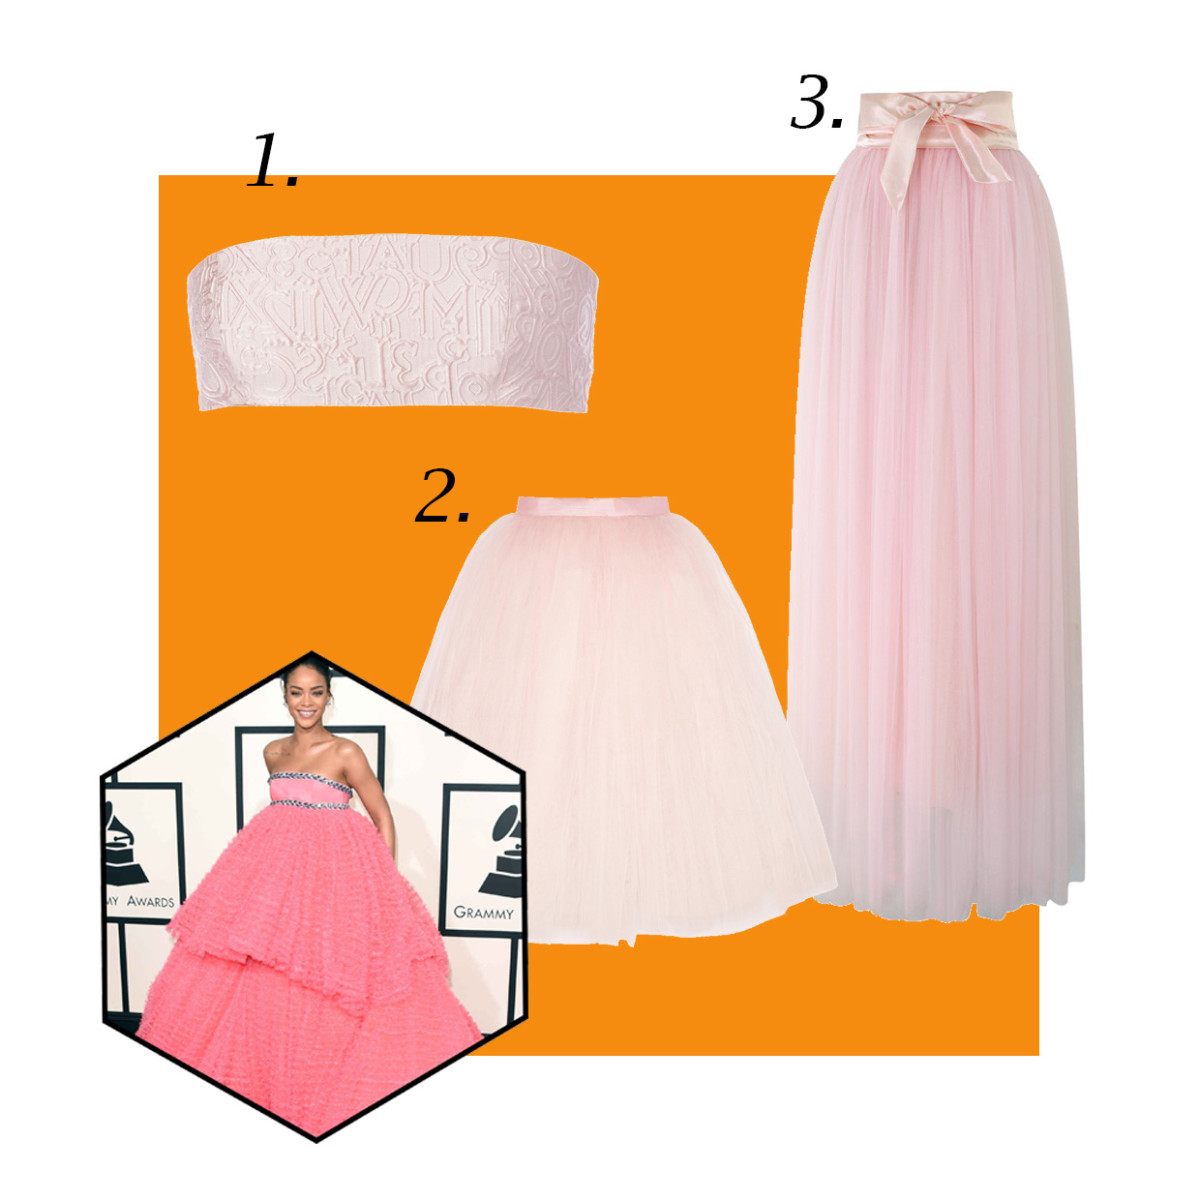 1. Mary Katrantzou bandeau, now $198.20, available at Farfetch; 2. Ballet Beautiful Tulle skirt, $165, available at Net-a-Porter; 3. Amore Maxi Tulle Prom Skirt in Pink, now $59.42, available at Chic Wish; 4. Doll Candy tulle petticoat (not pictured), $3.95, available at Etsy. Photo: Jason Merritt/Getty Images